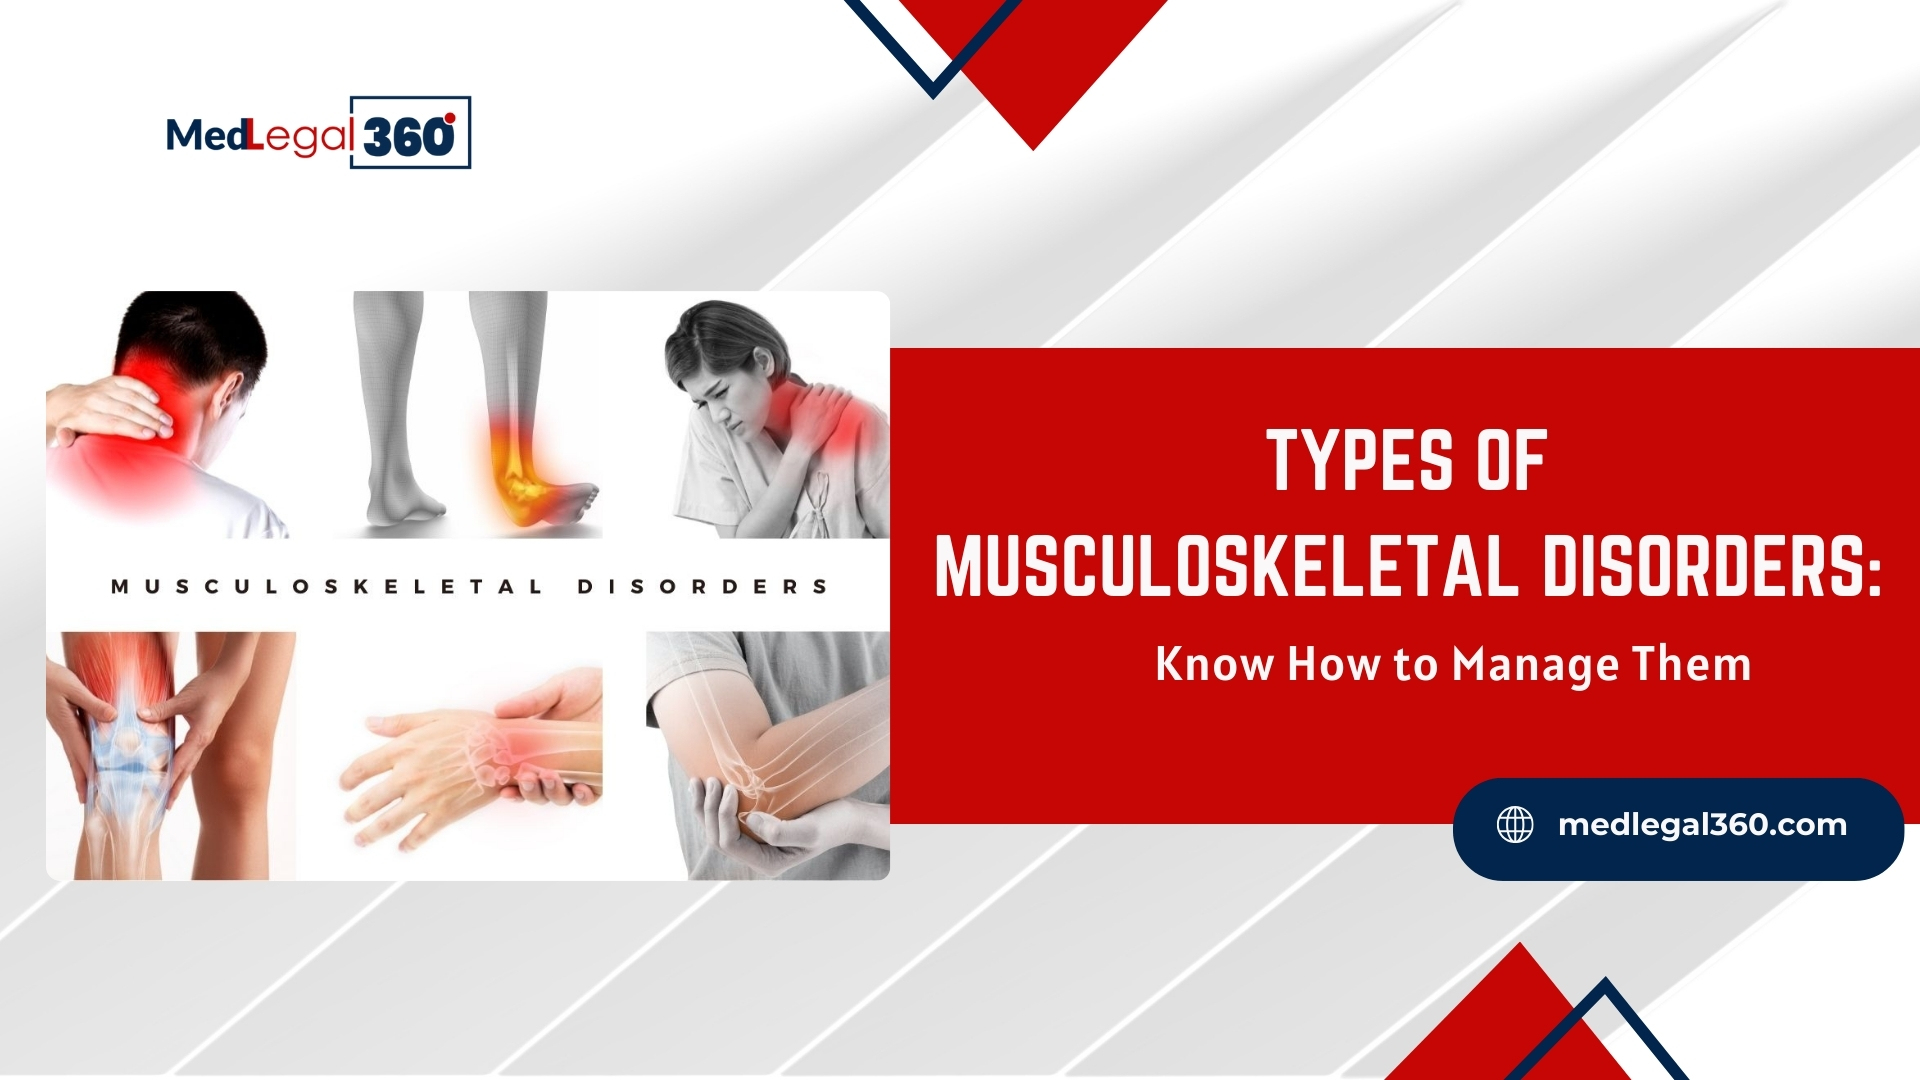 Types of Musculoskeletal Disorders: Know How to Manage Them